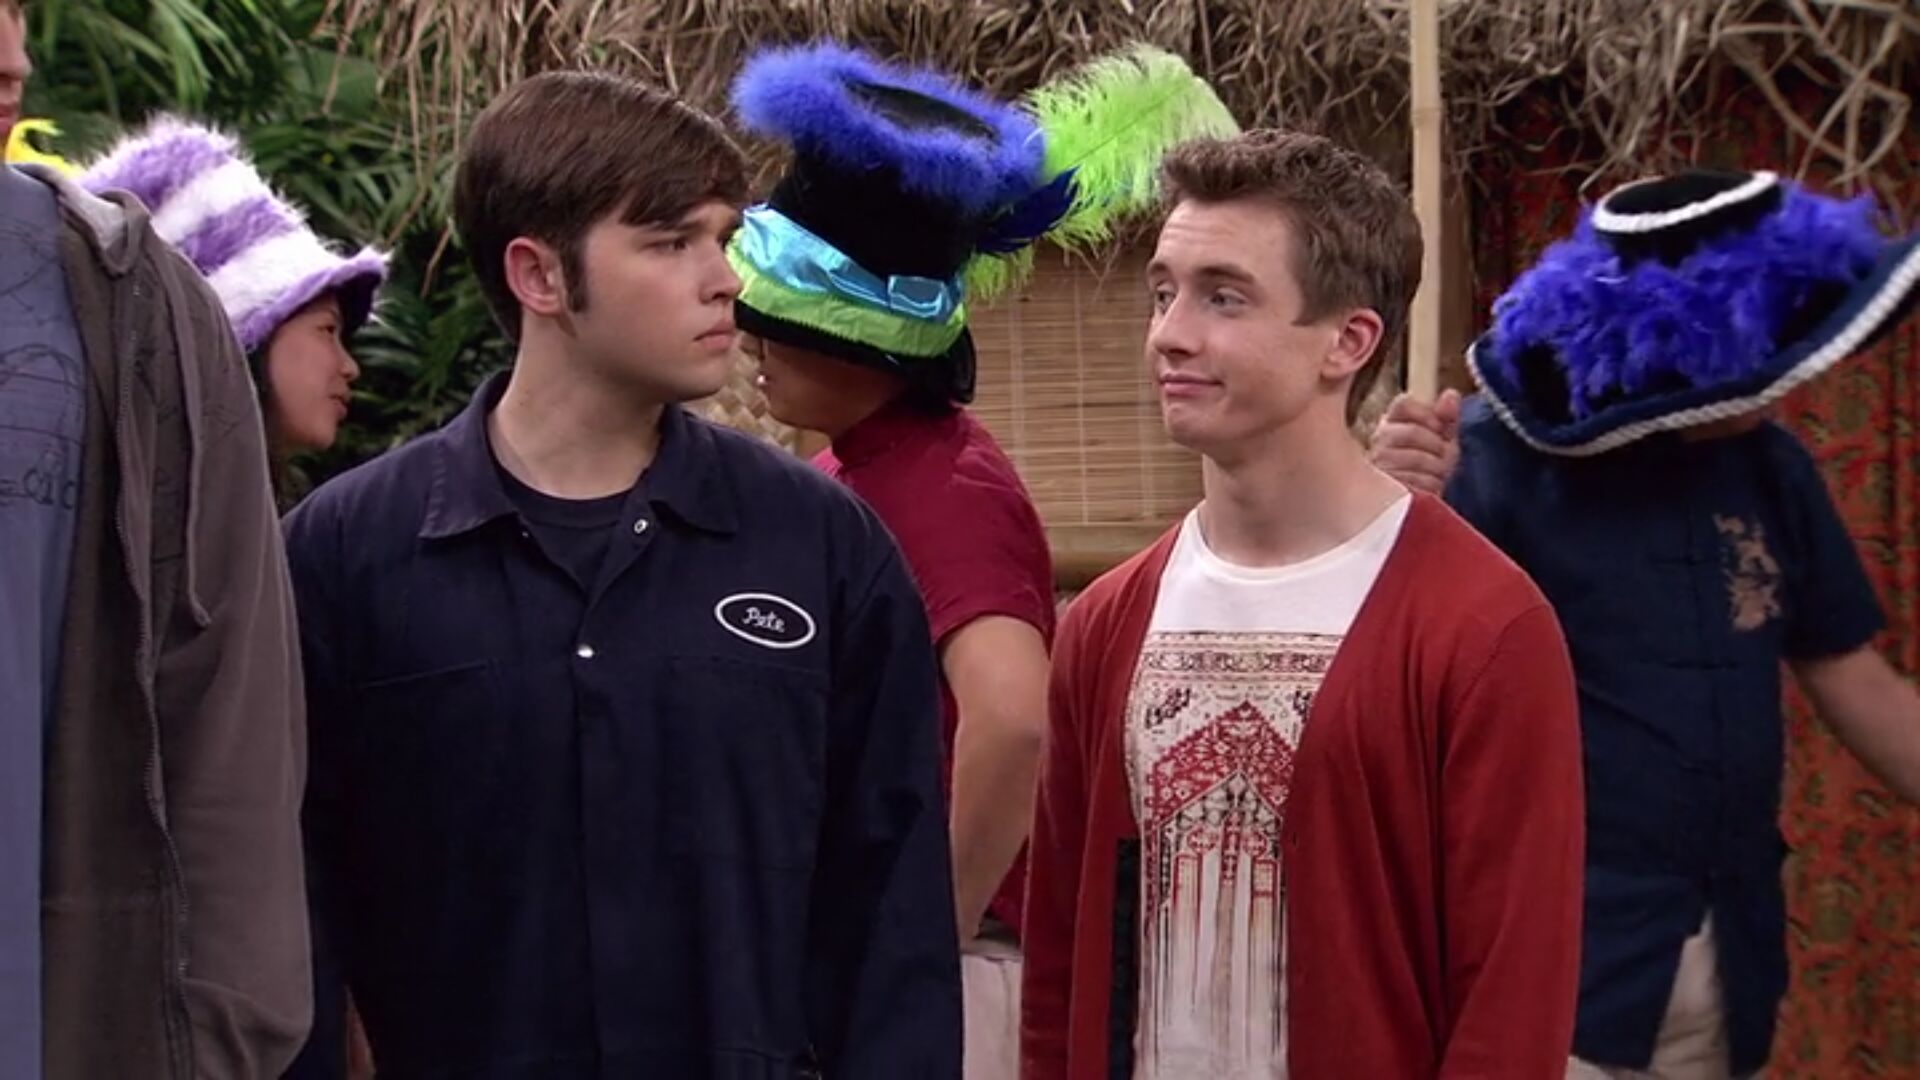 Nathan Kress in Mr. Young, episode: Mr. Finale